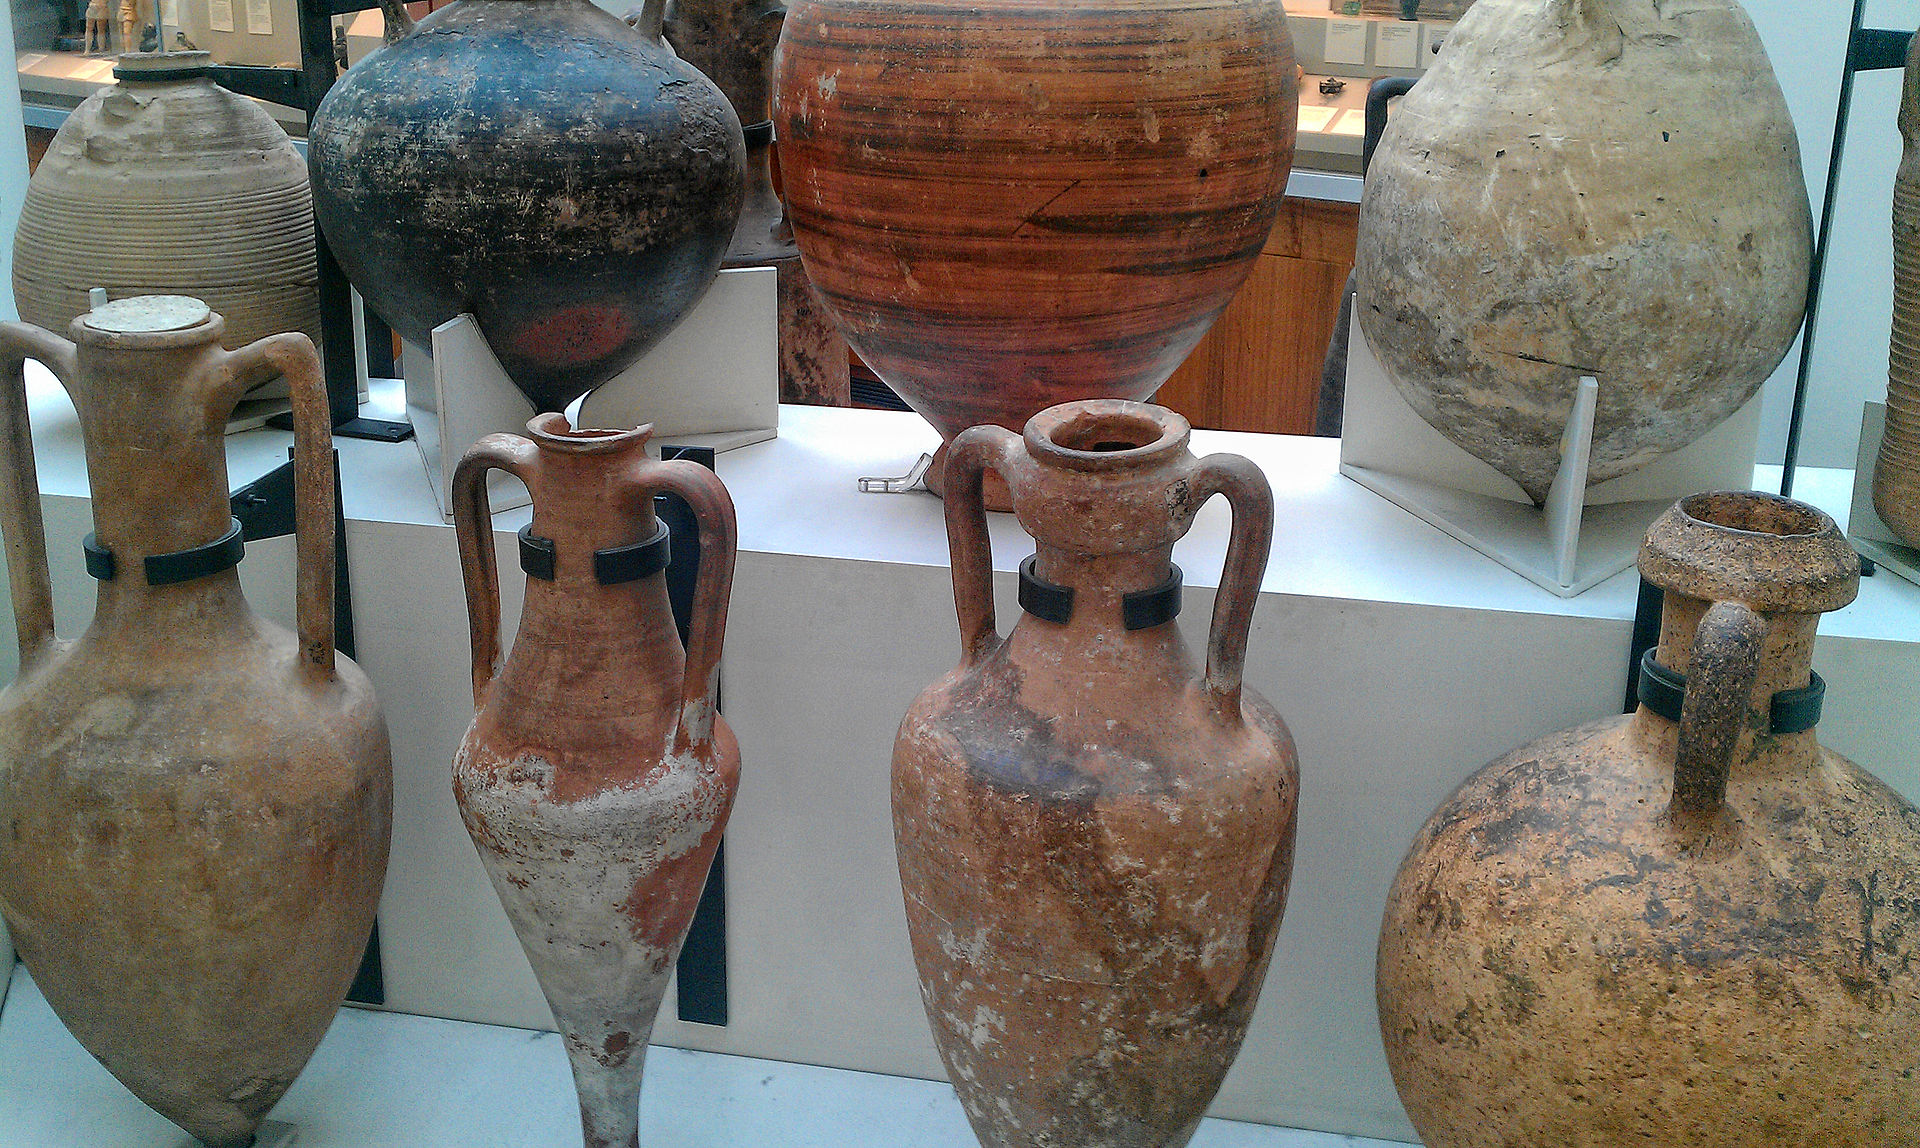 Feat of Clay: Herdade do Rocim And Amphora Use in Winemaking